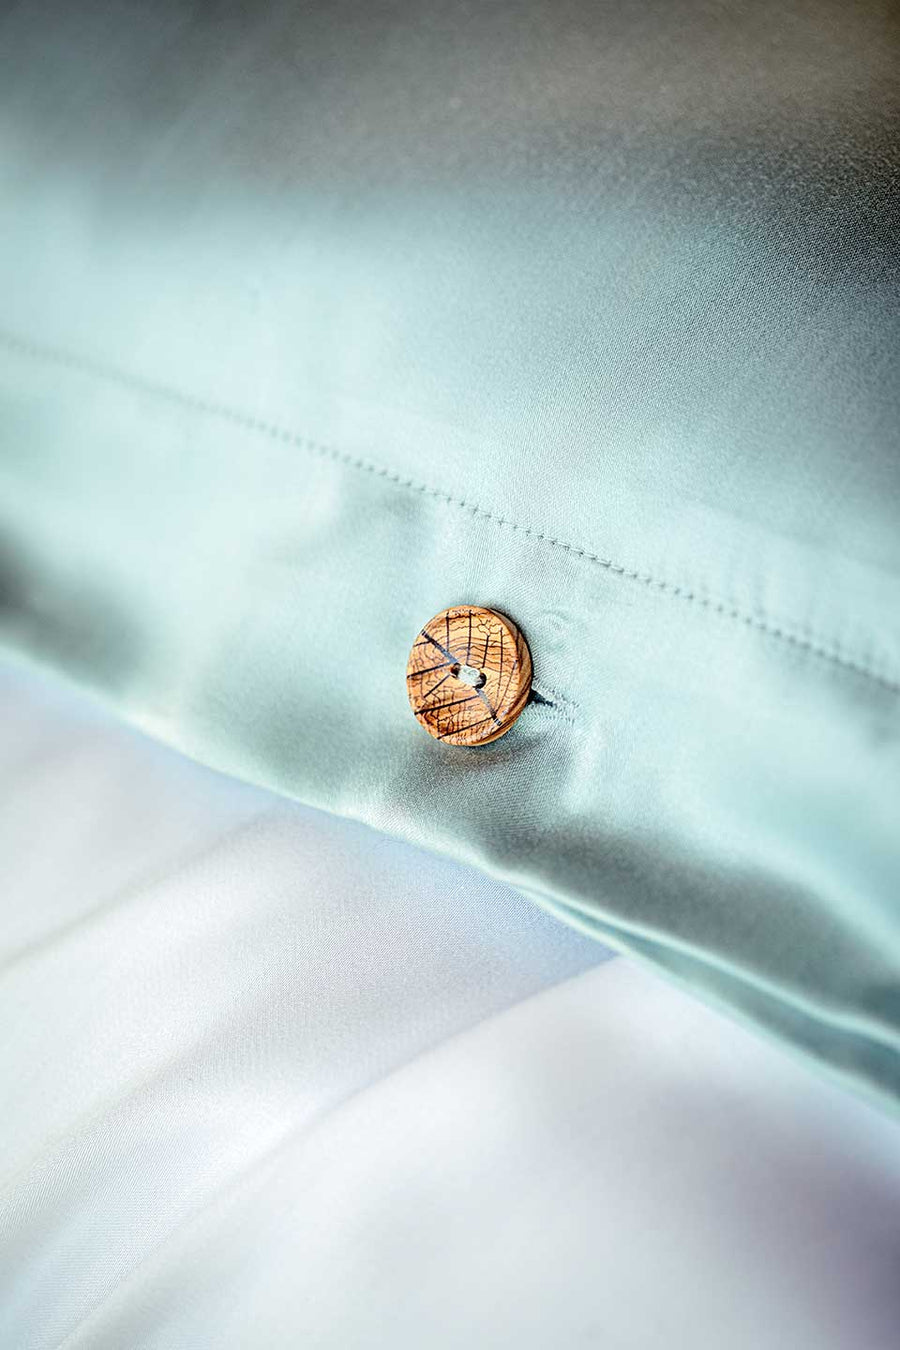 Olive button detail on a green TENCEL™ Lyocell Sateen duvet cover from THON.